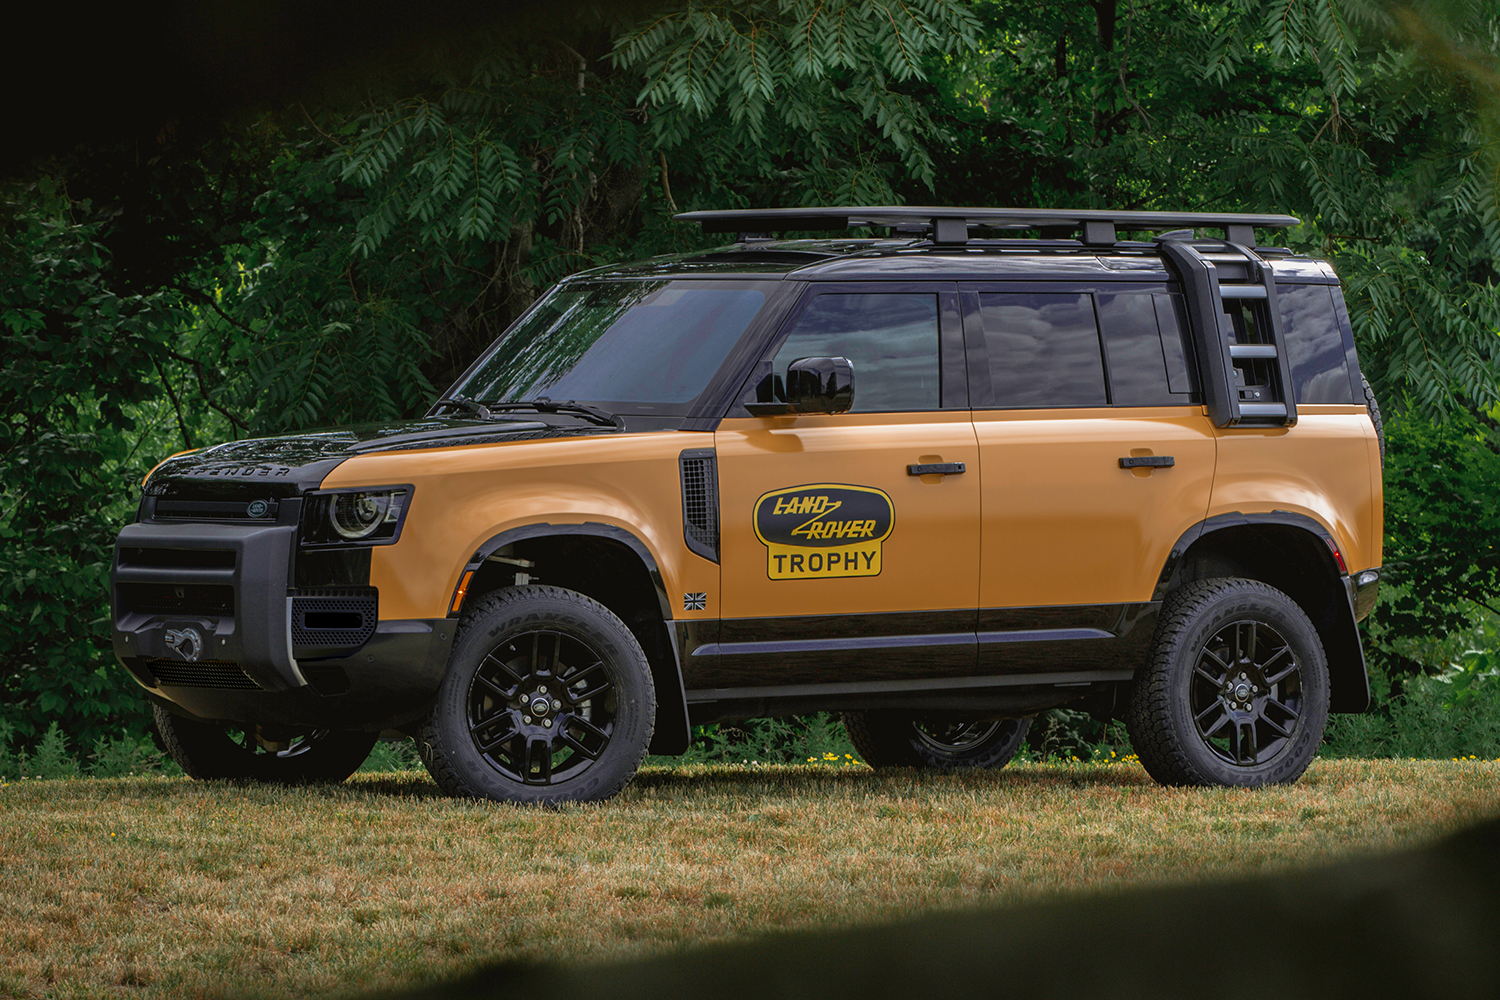 The new 2022 Land Rover Defender Trophy Edition, a limited-edition SUV that comes with entry into the off-road Trophy Competition